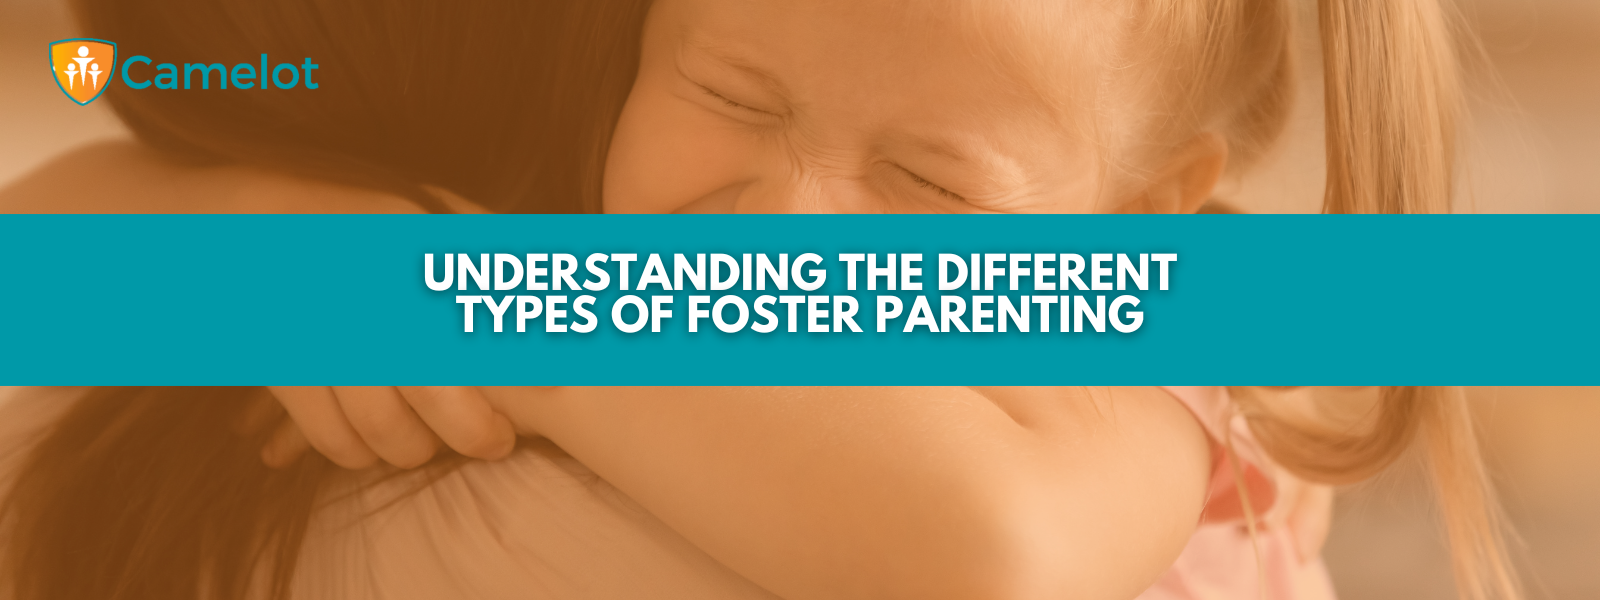 Types of Foster Parenting | Camelot